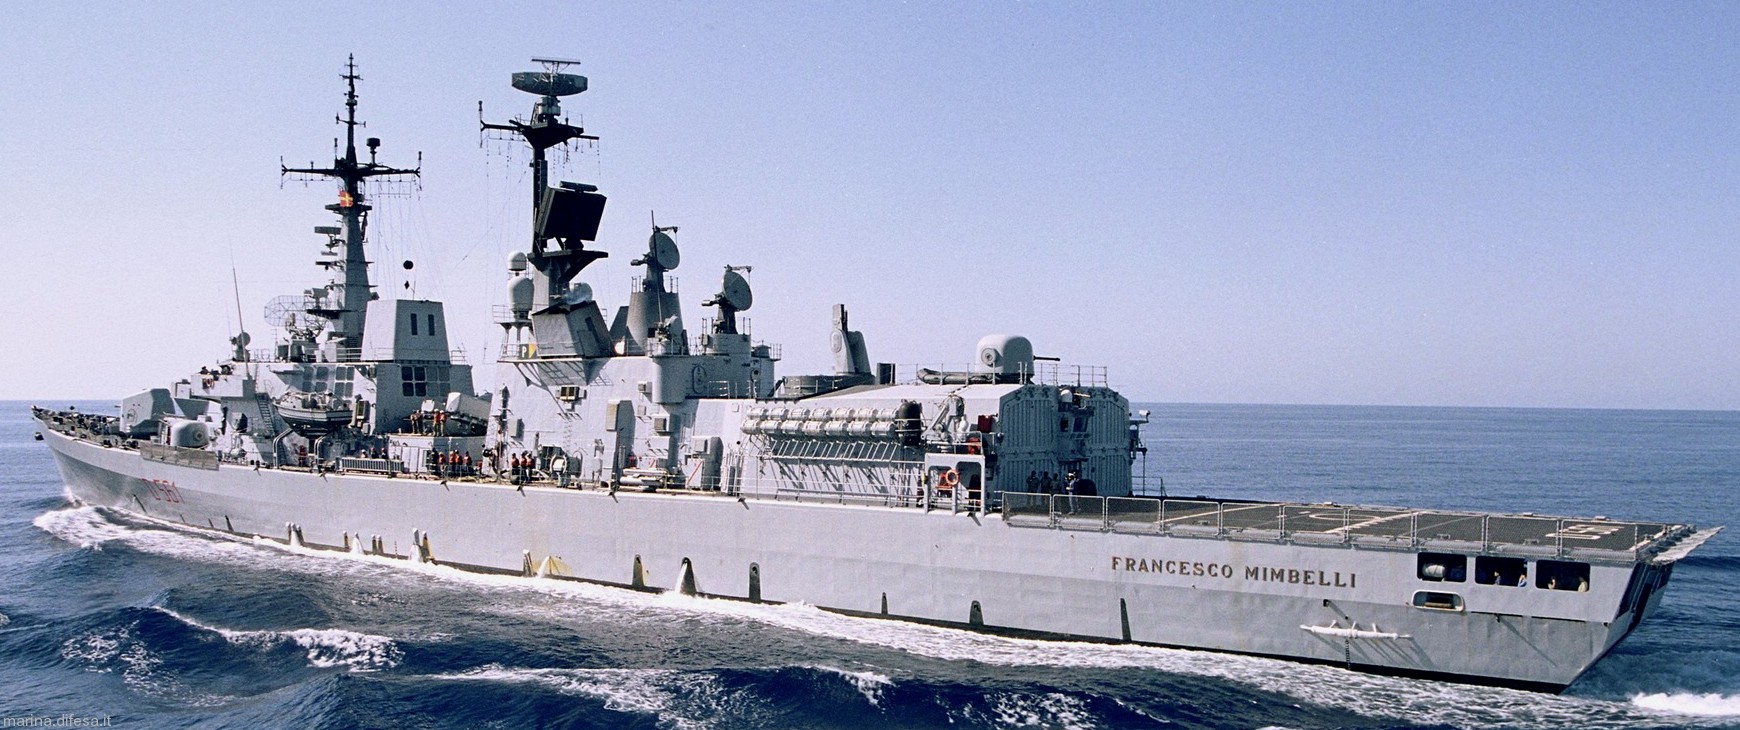 d-561 francesco mimbelli its nave guided missile destroyer ddg italian navy marina militare 40